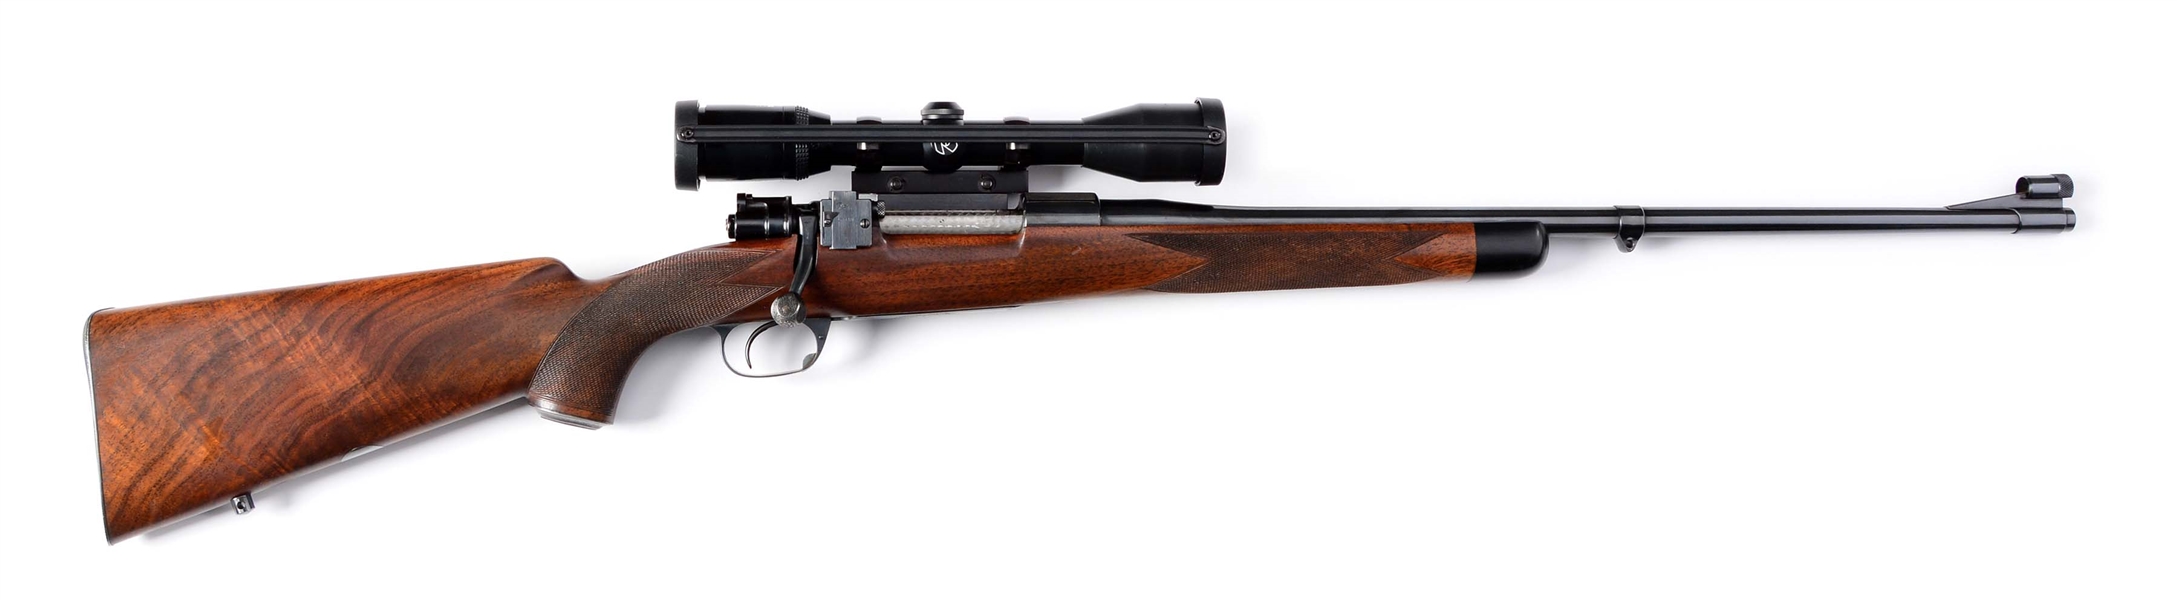 (C) FINE EARLY 50S GRIFFIN & HOWE CUSTOM 98 MAUSER RIFLE WITH ENGRAVING BY JOE FUGGER WITH ZEISS SCOPE (CIRCA 1953).